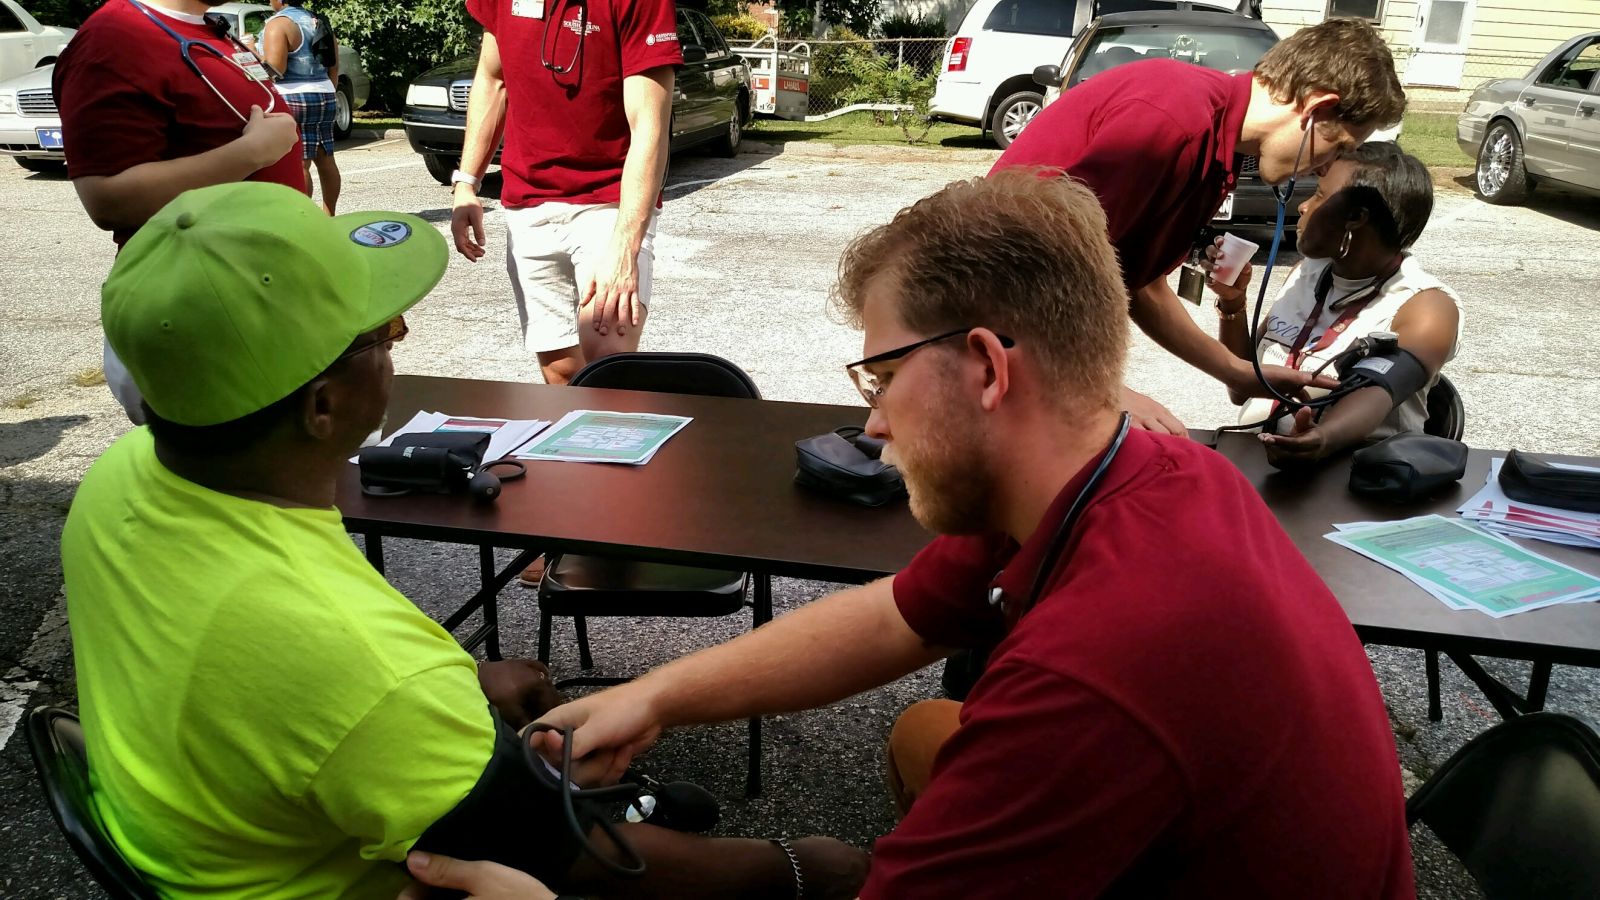 Students in the USC program serve Nicholtown residents. (Photo/Provided)